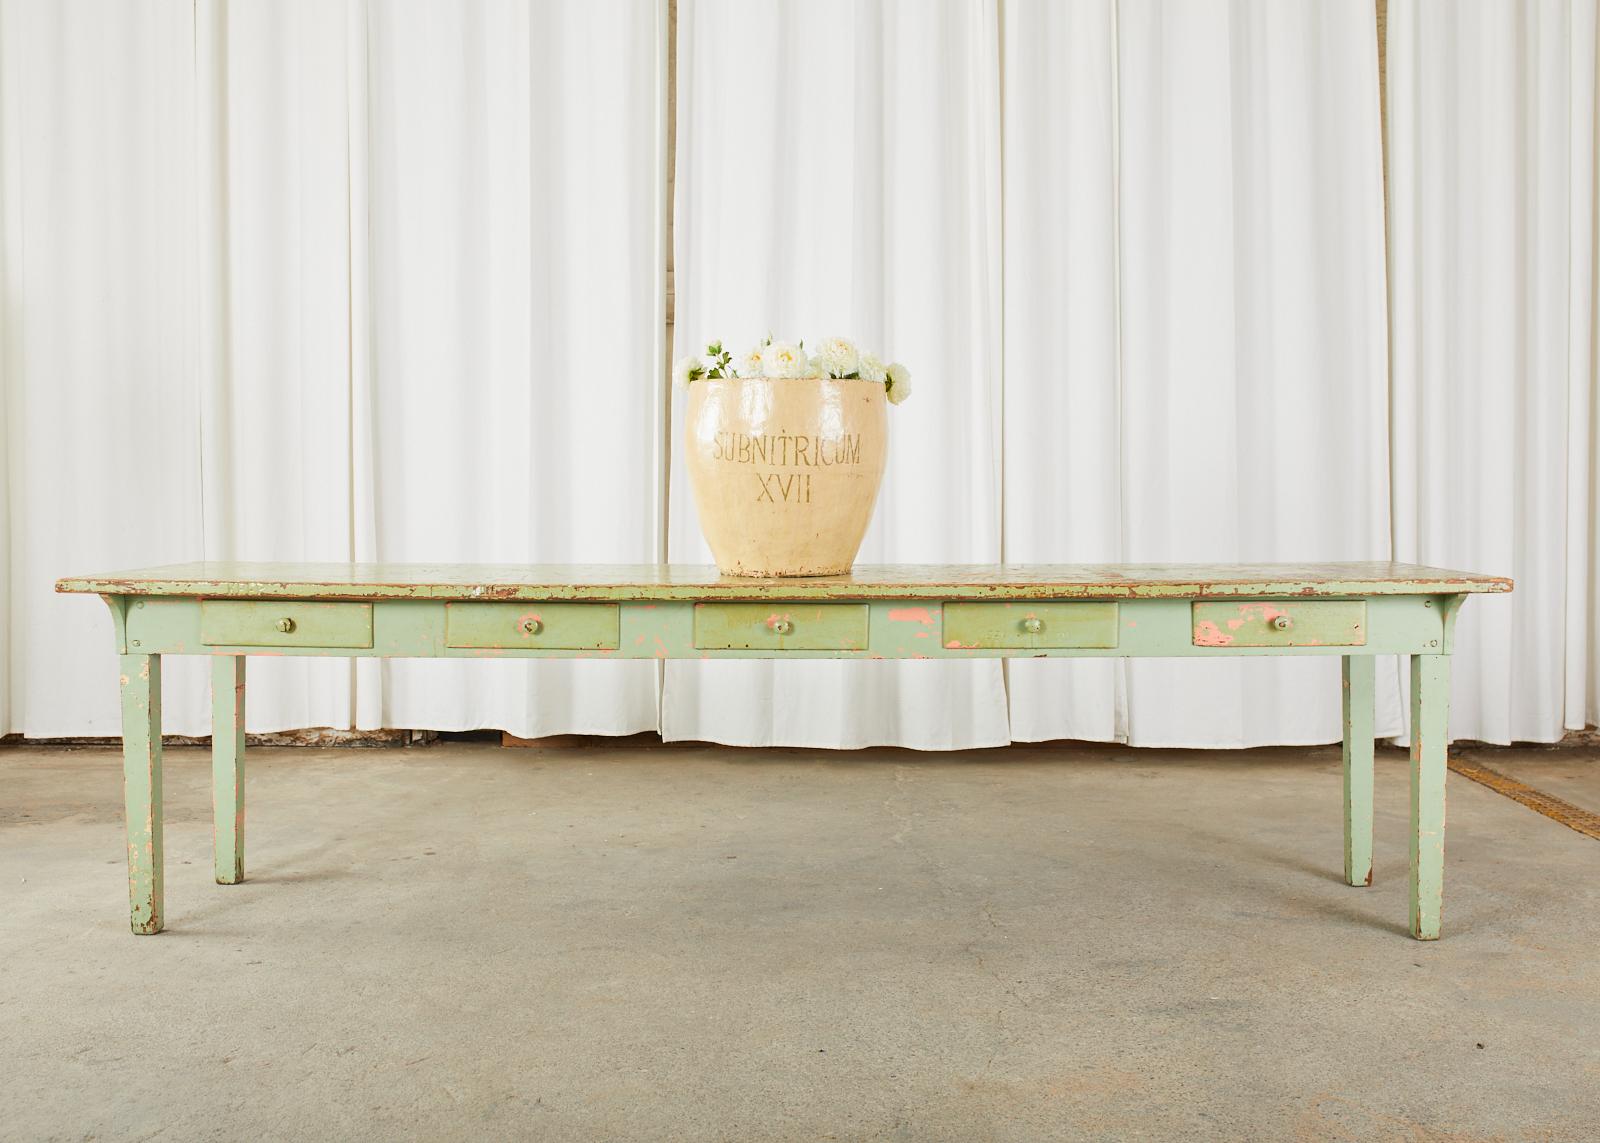 Large rustic late 19th century country French farmhouse work table or dining harvest table featuring a sage green painted finish. Crafted from long, framed planks the top measures over 9.5 feet long. The frieze has five storage drawers on one side